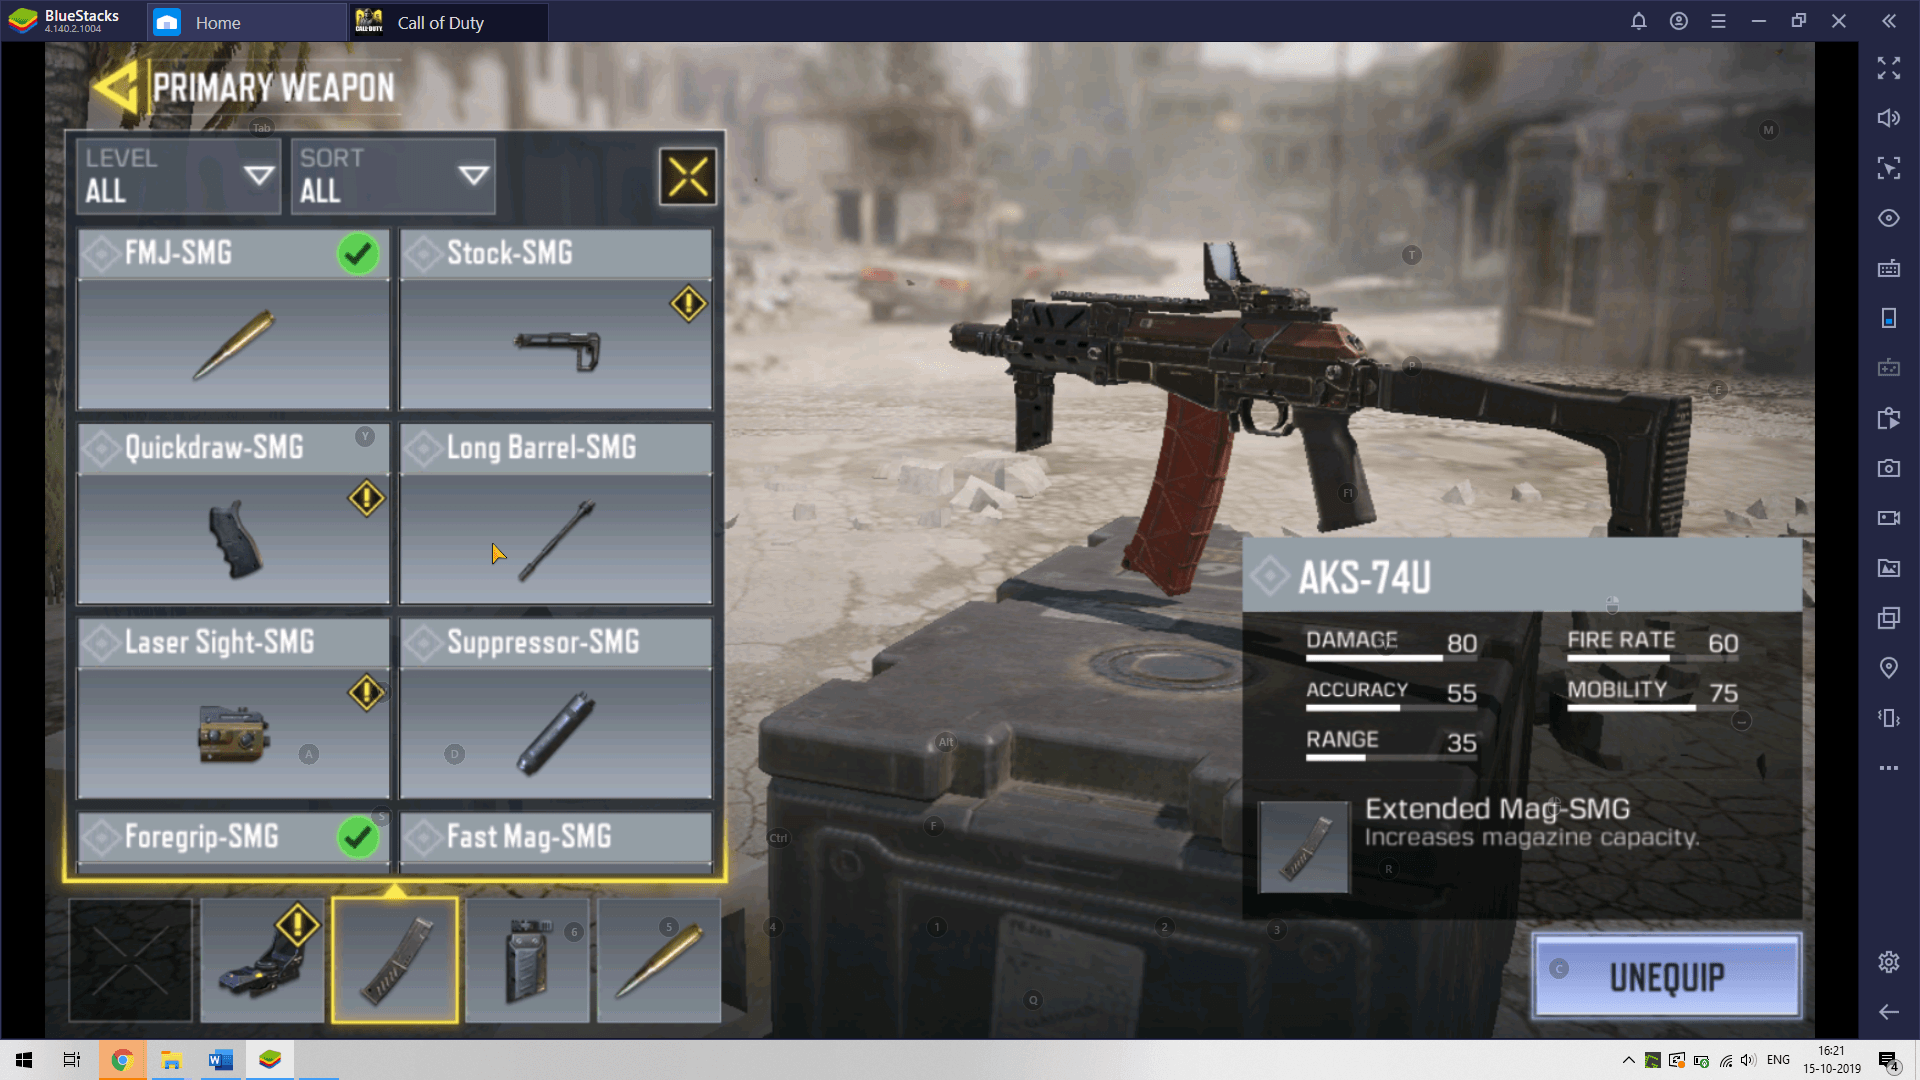 Free For All: The Hot New Game Mode in Call of Duty: Mobile on PC